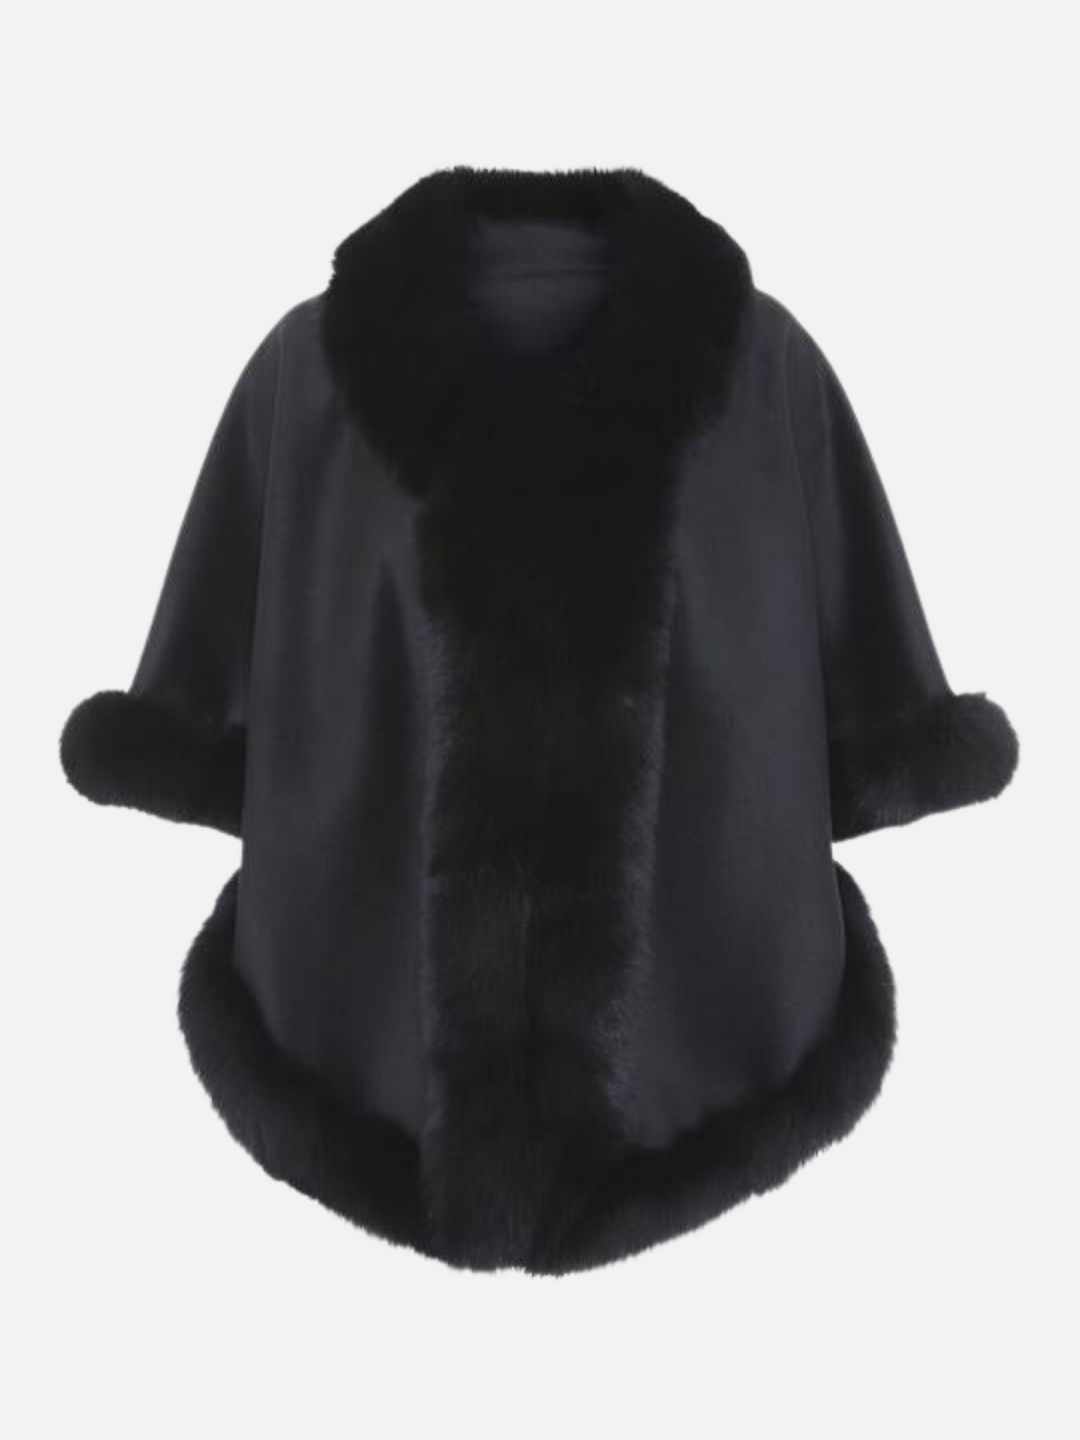 Chadron Cape, 65 cm. - Thinner Double Face Wool - Black.